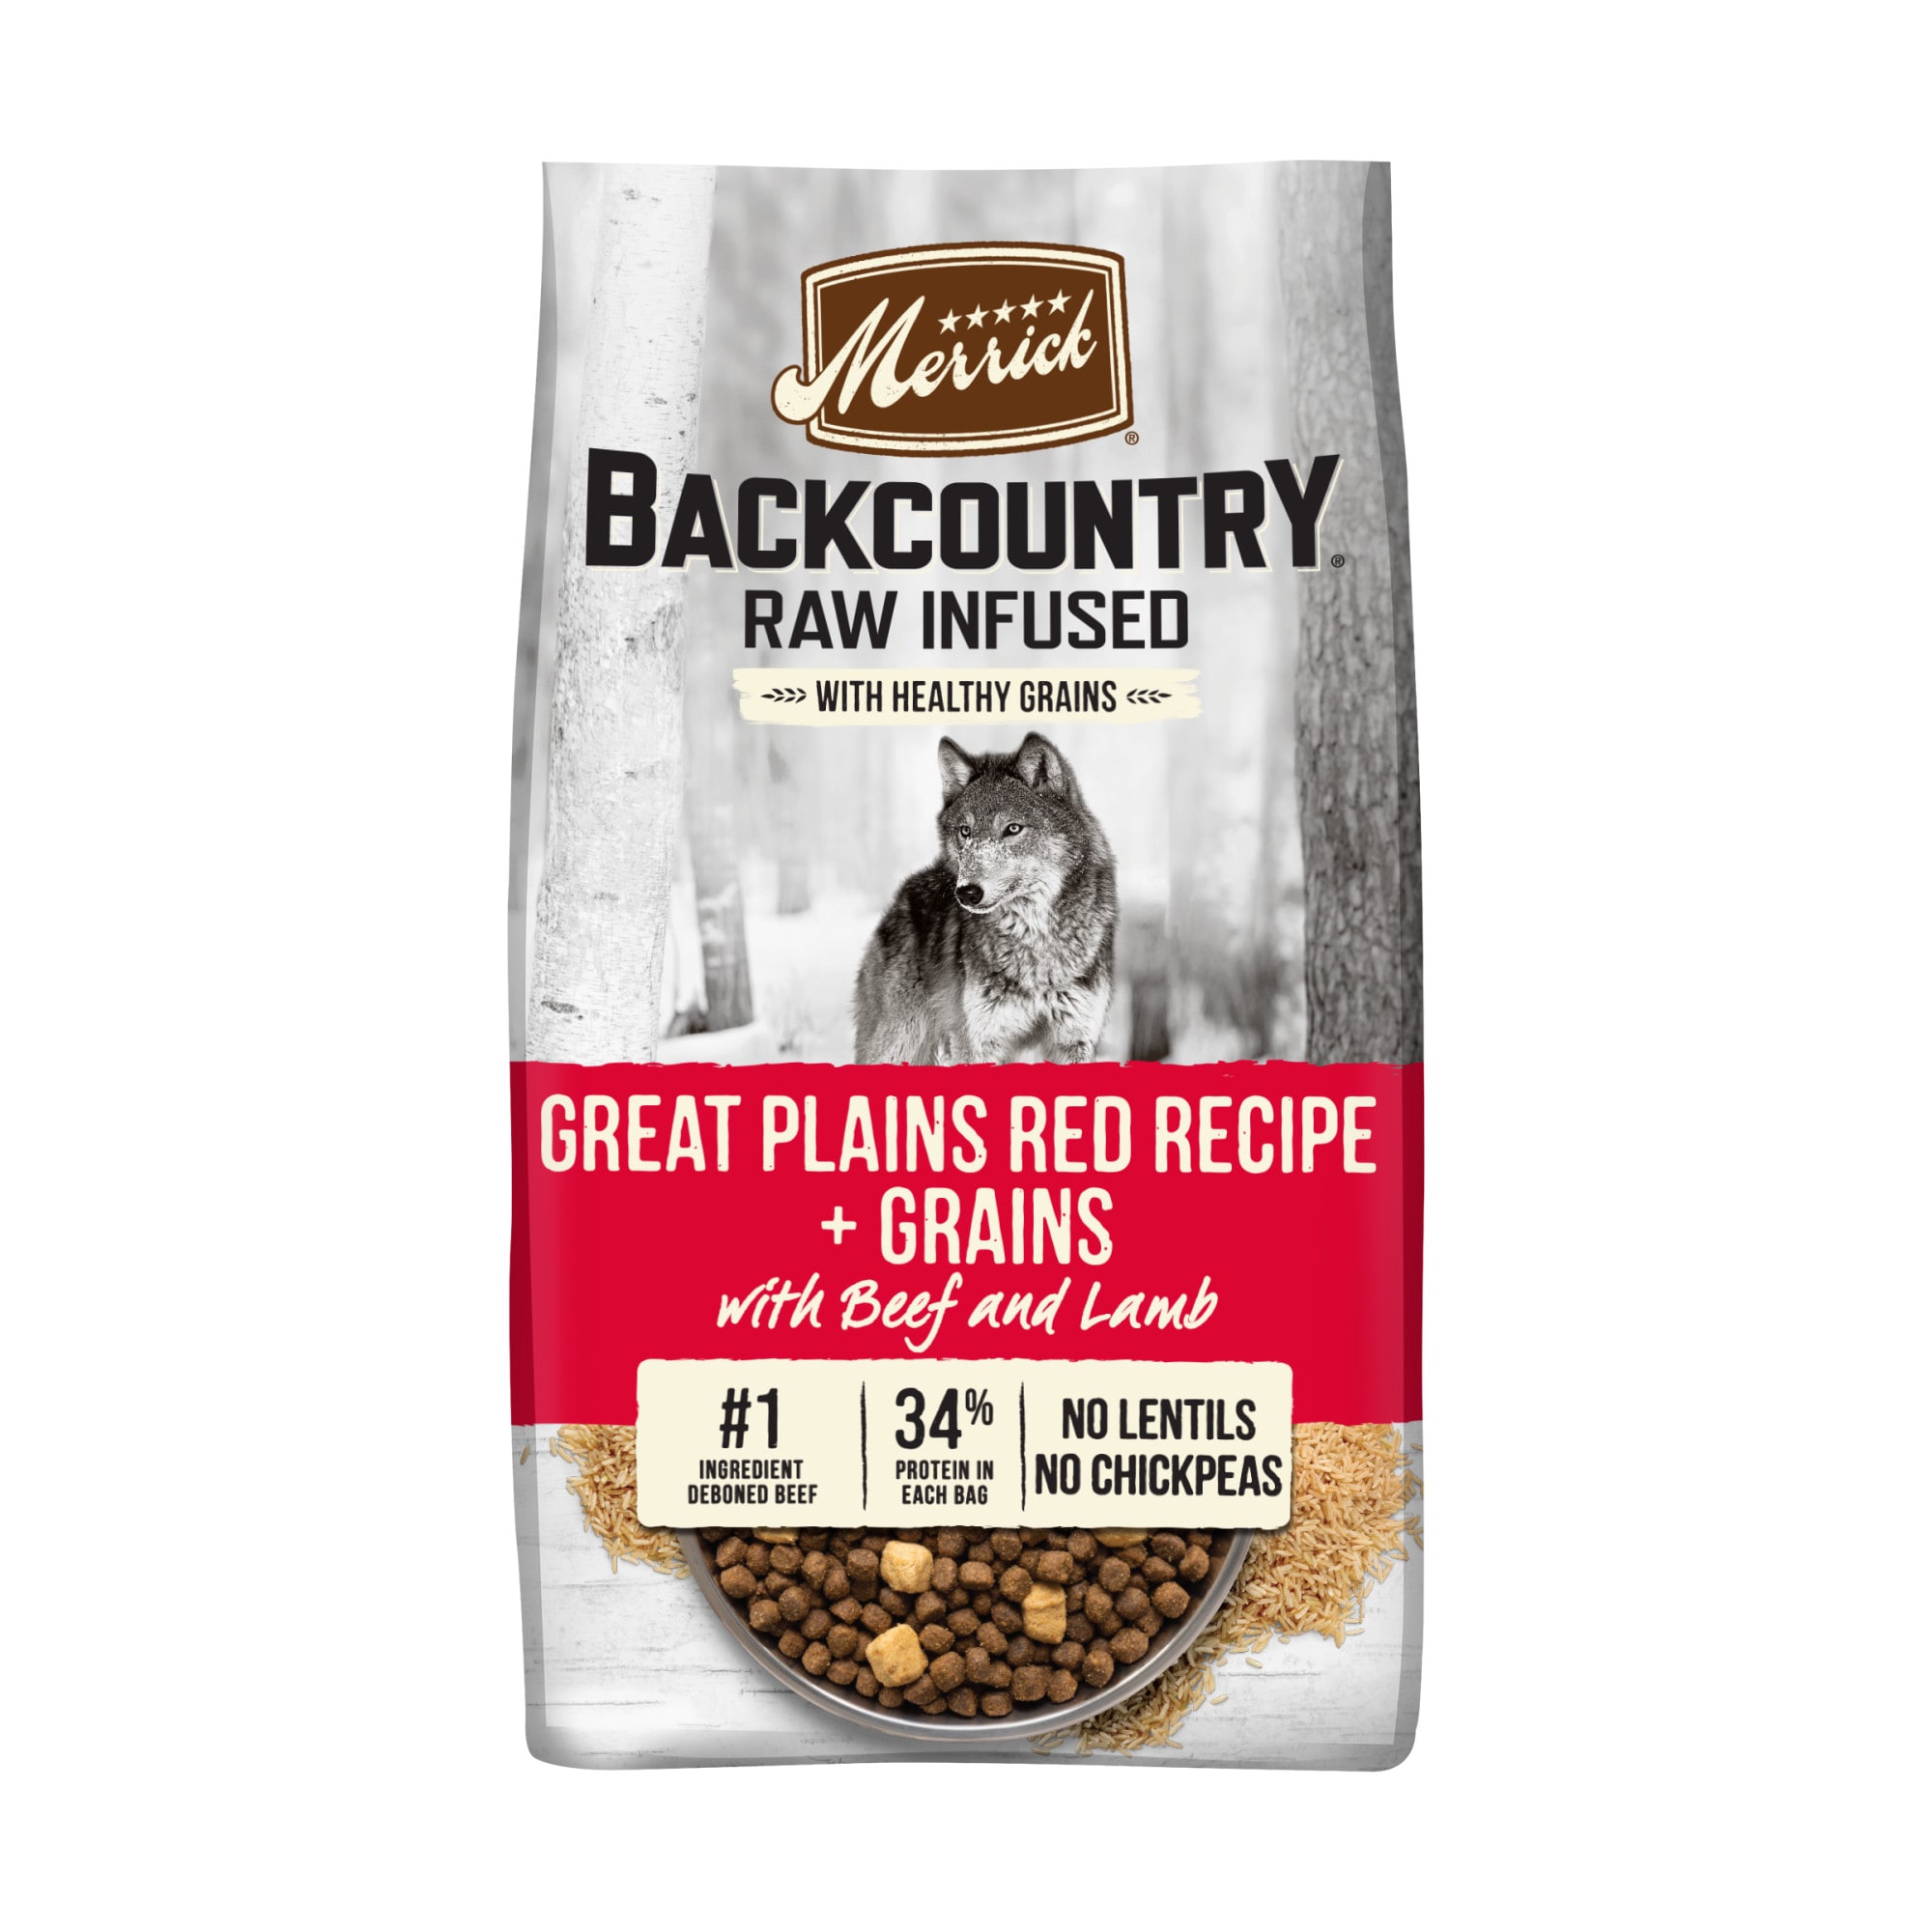 Merrick Backcountry Freeze Dried Raw Infused Great Plains Red Recipe